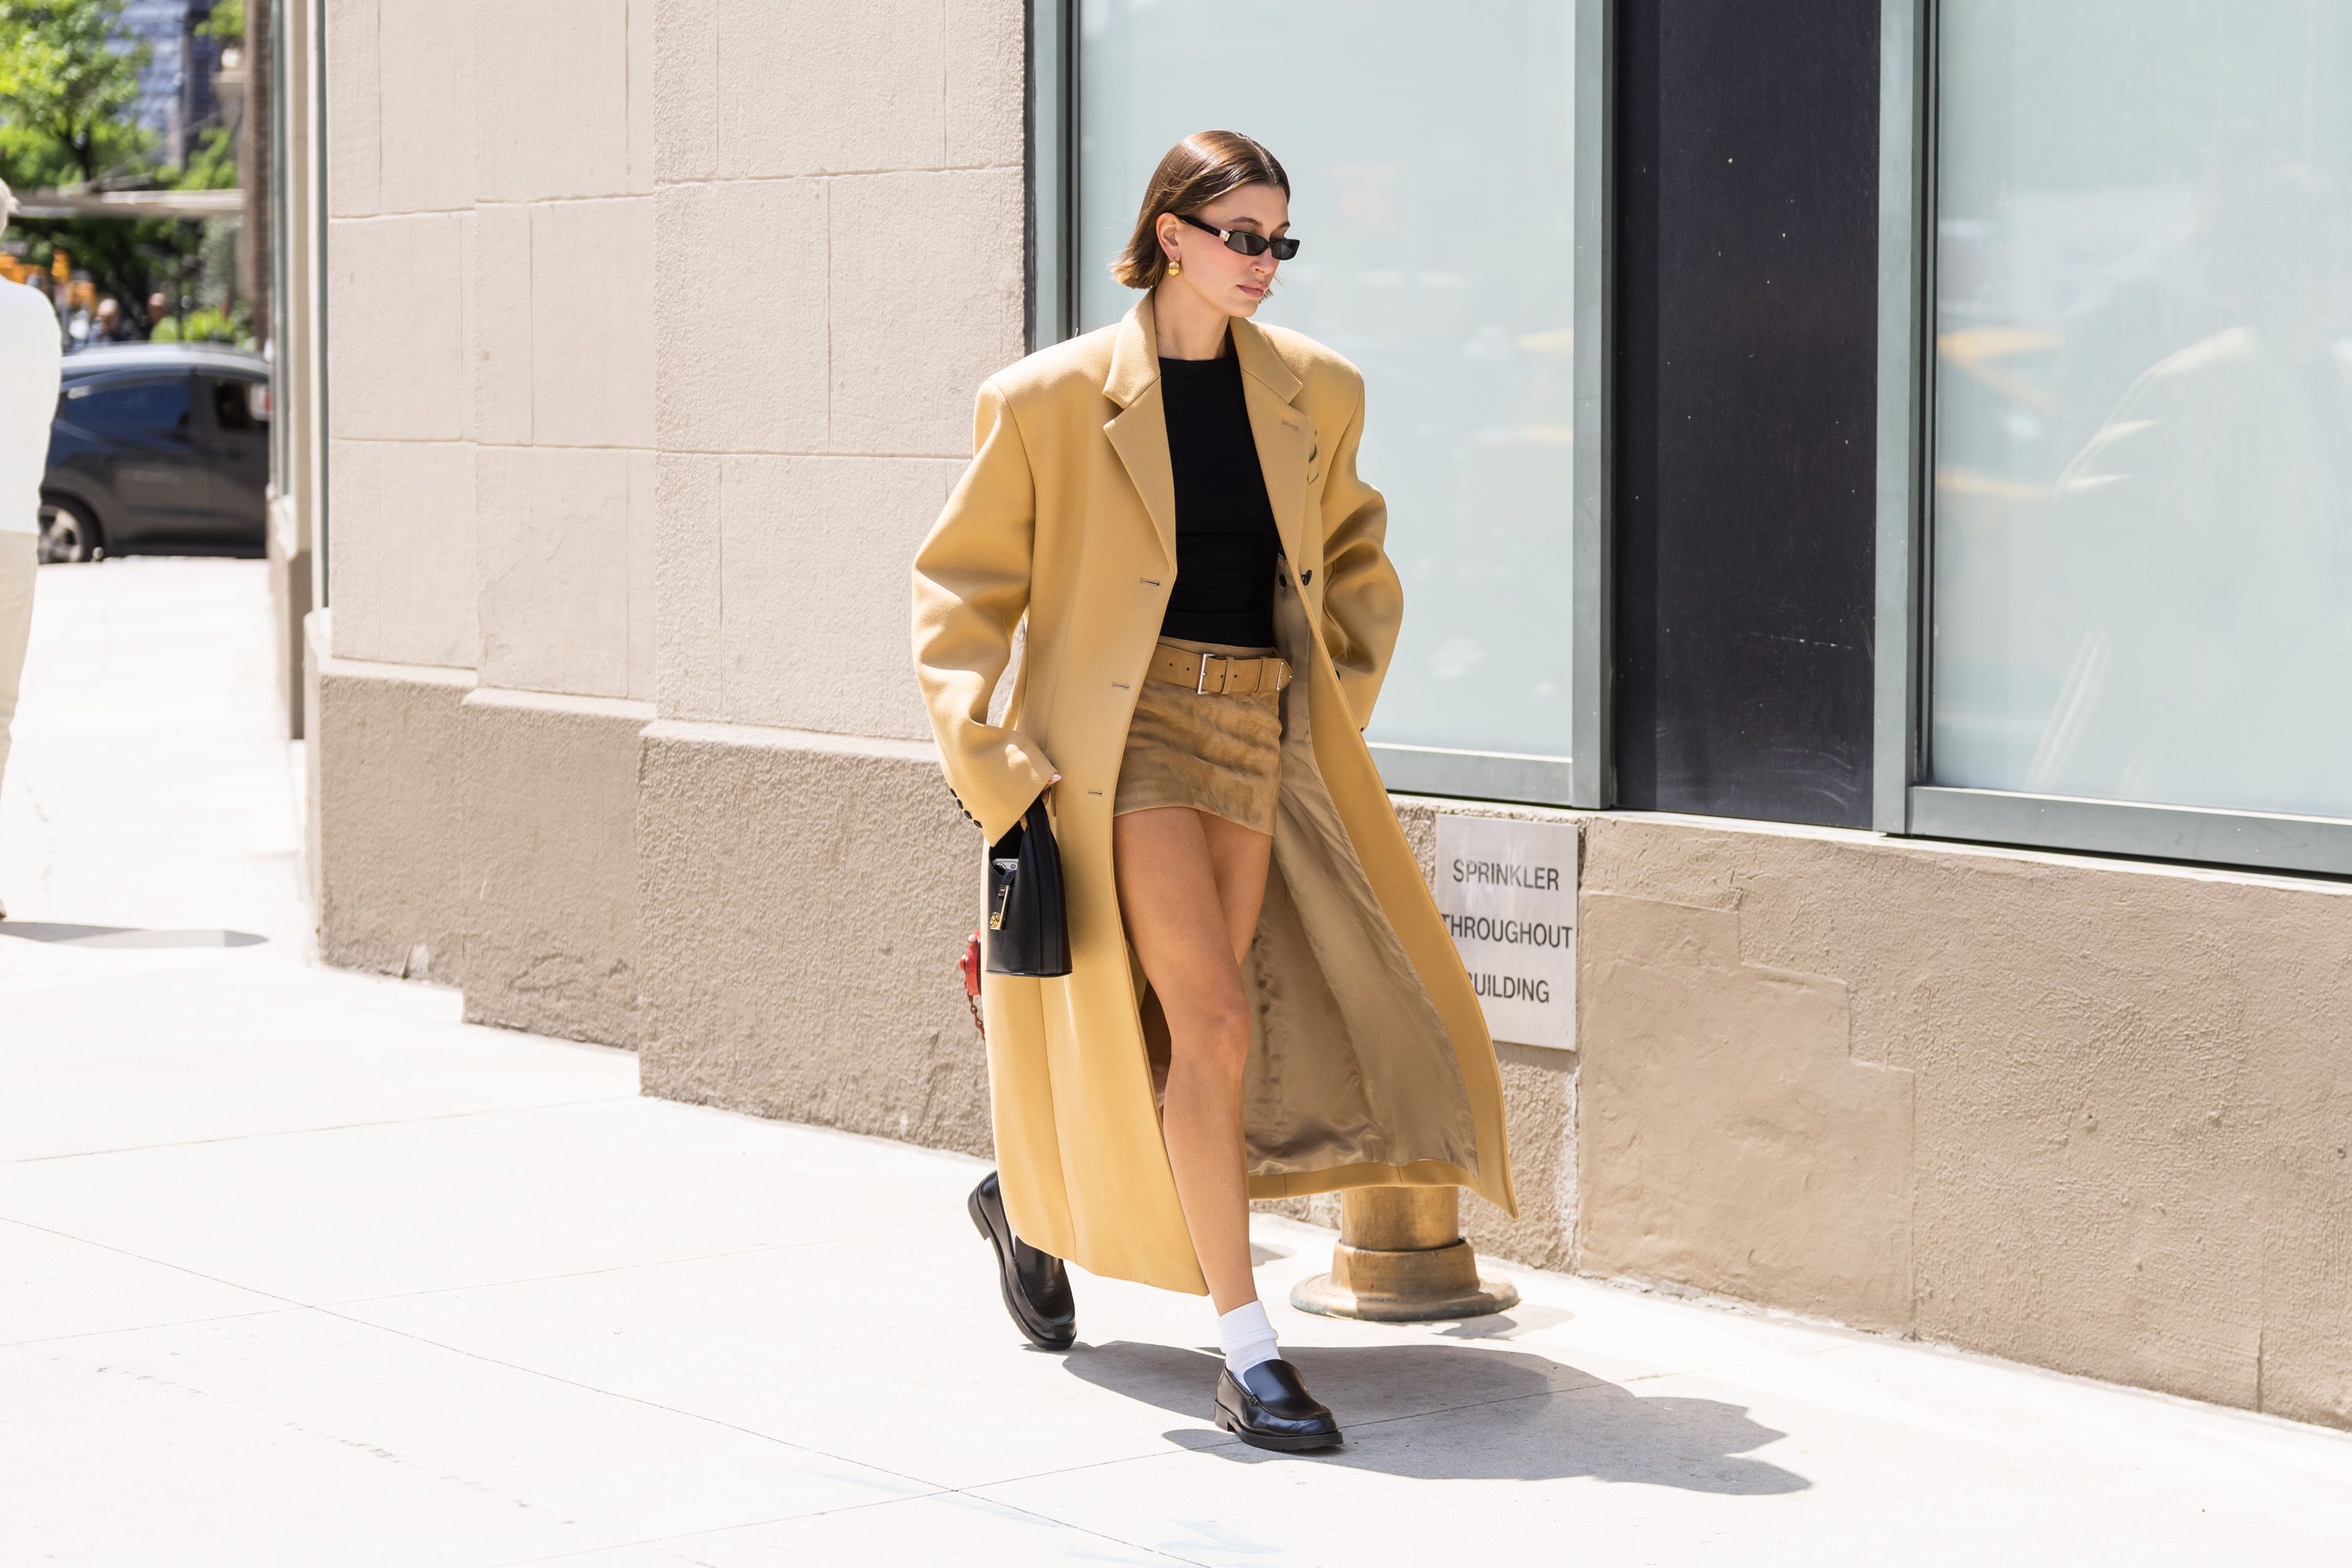 Kendall Jenner Beverly Hills April 24, 2019 – Star Style